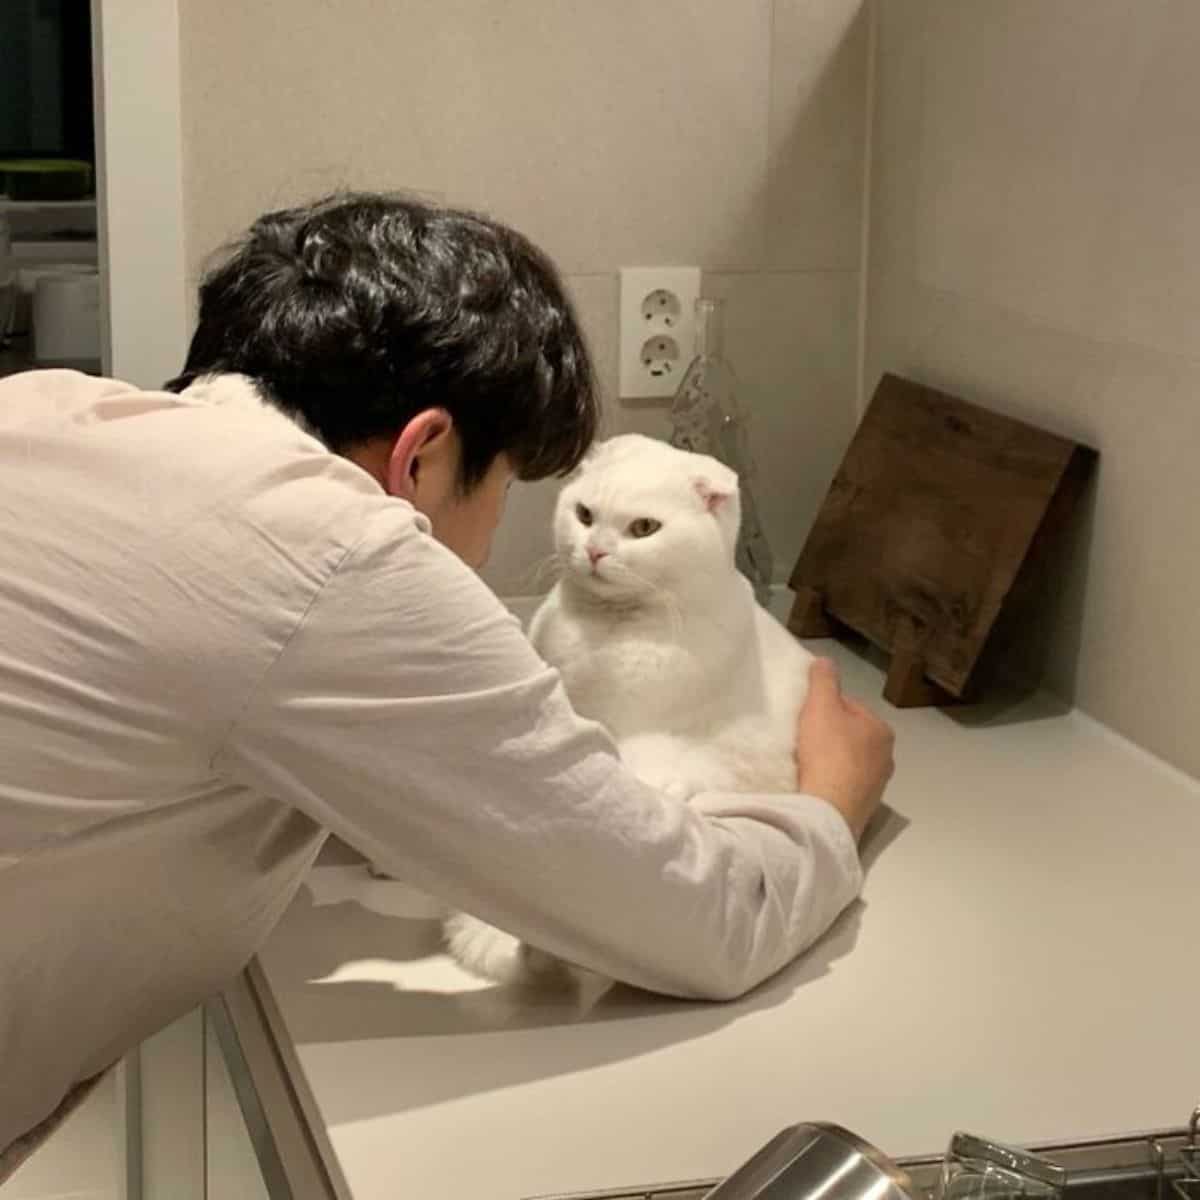 the cat looks at the owner while petting it